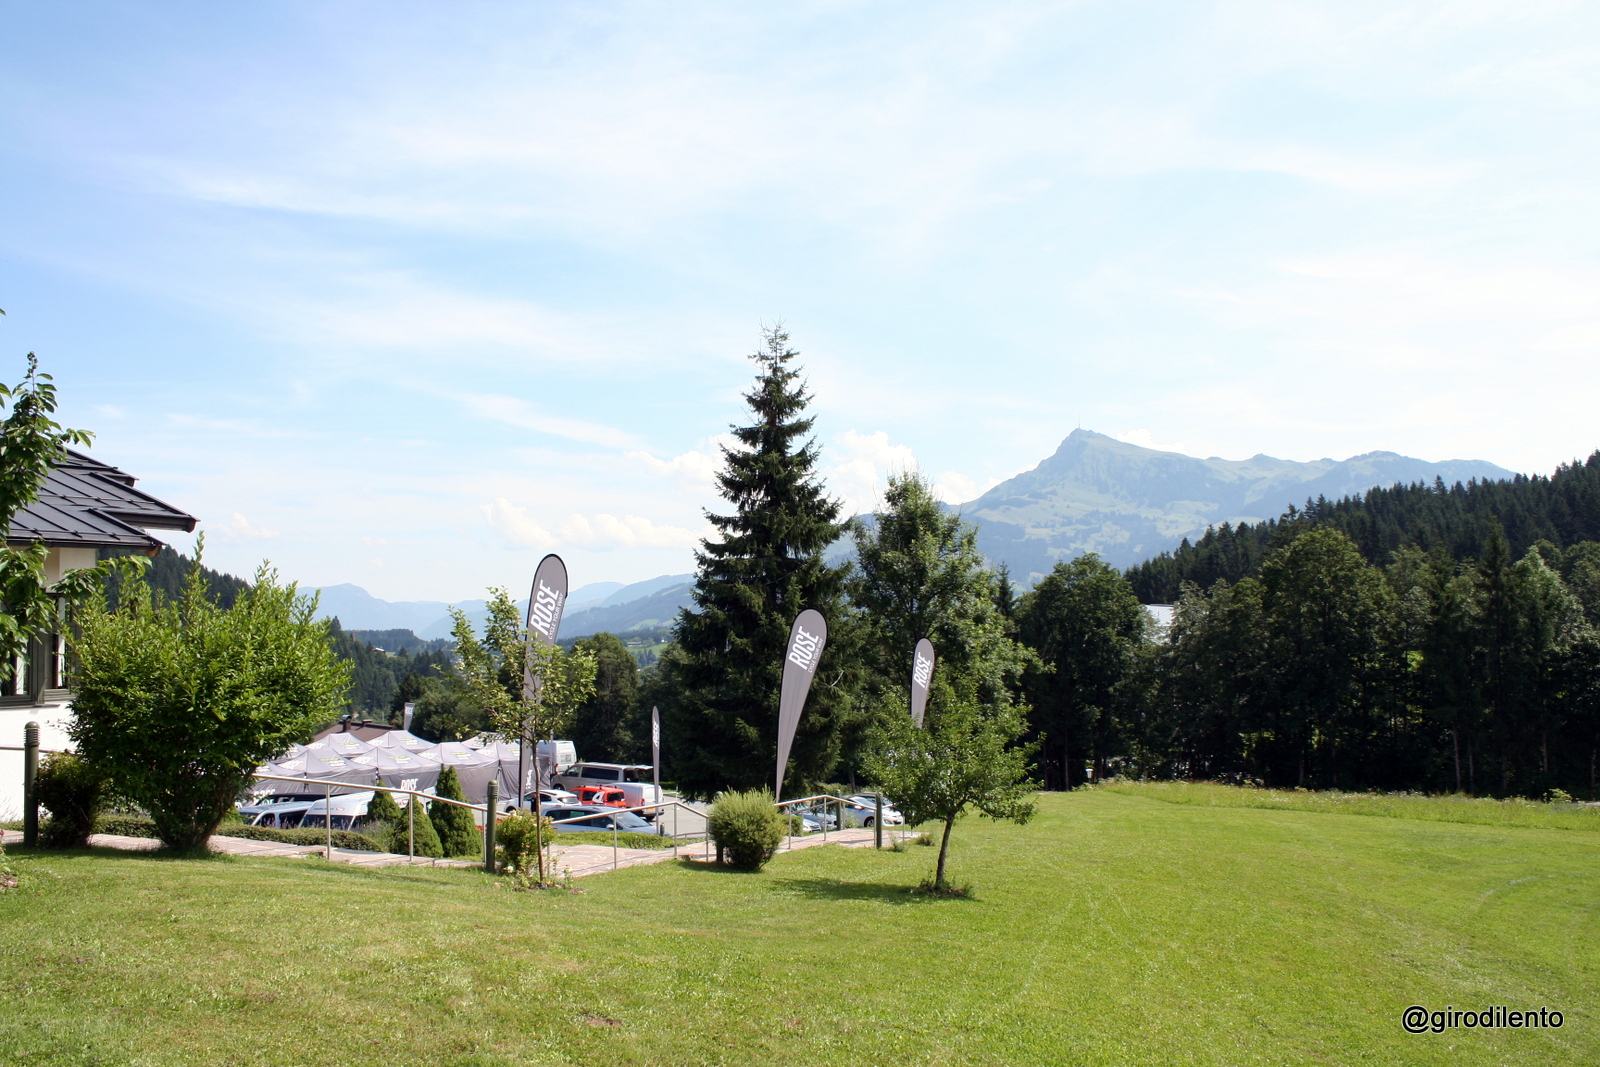 The view towards Kitzbüheler Horn from the hotel